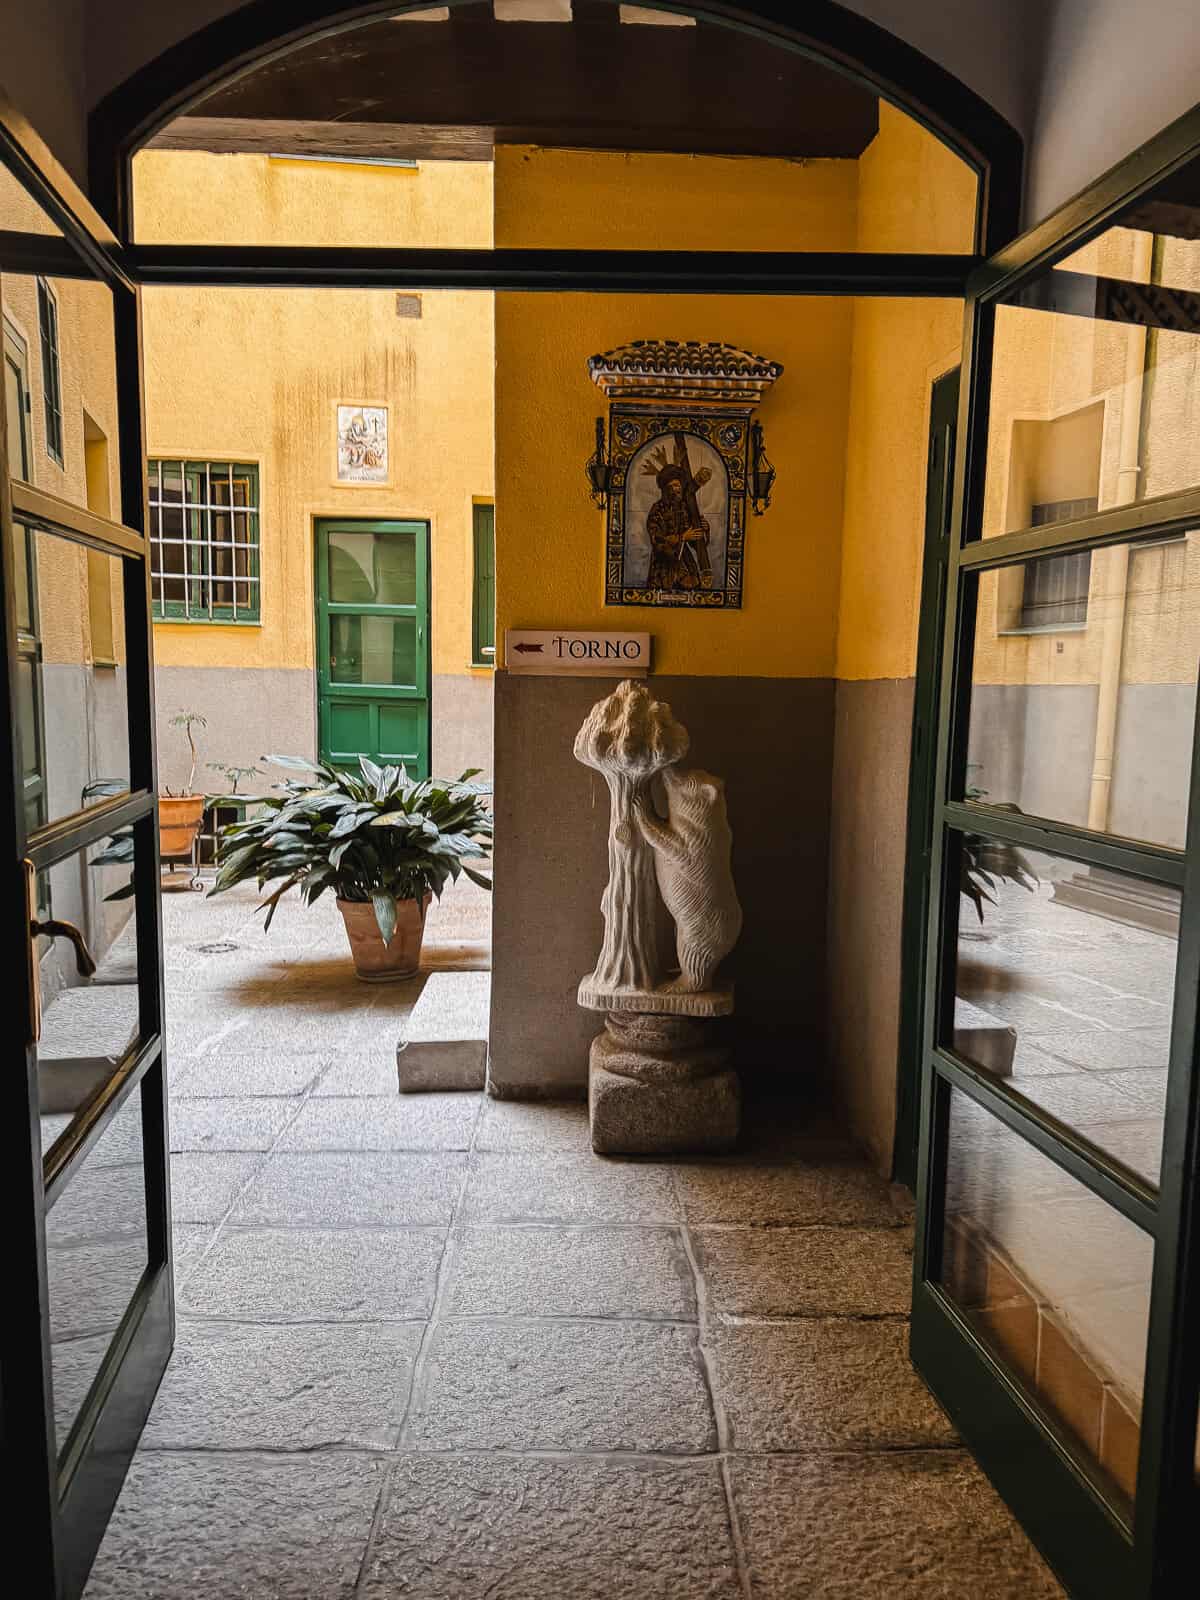 Interior courtyard view through an open doorway, showcasing a statue of a robed figure next to a 'TORNO' sign, with a decorative tile depicting a saint on the yellow wall.